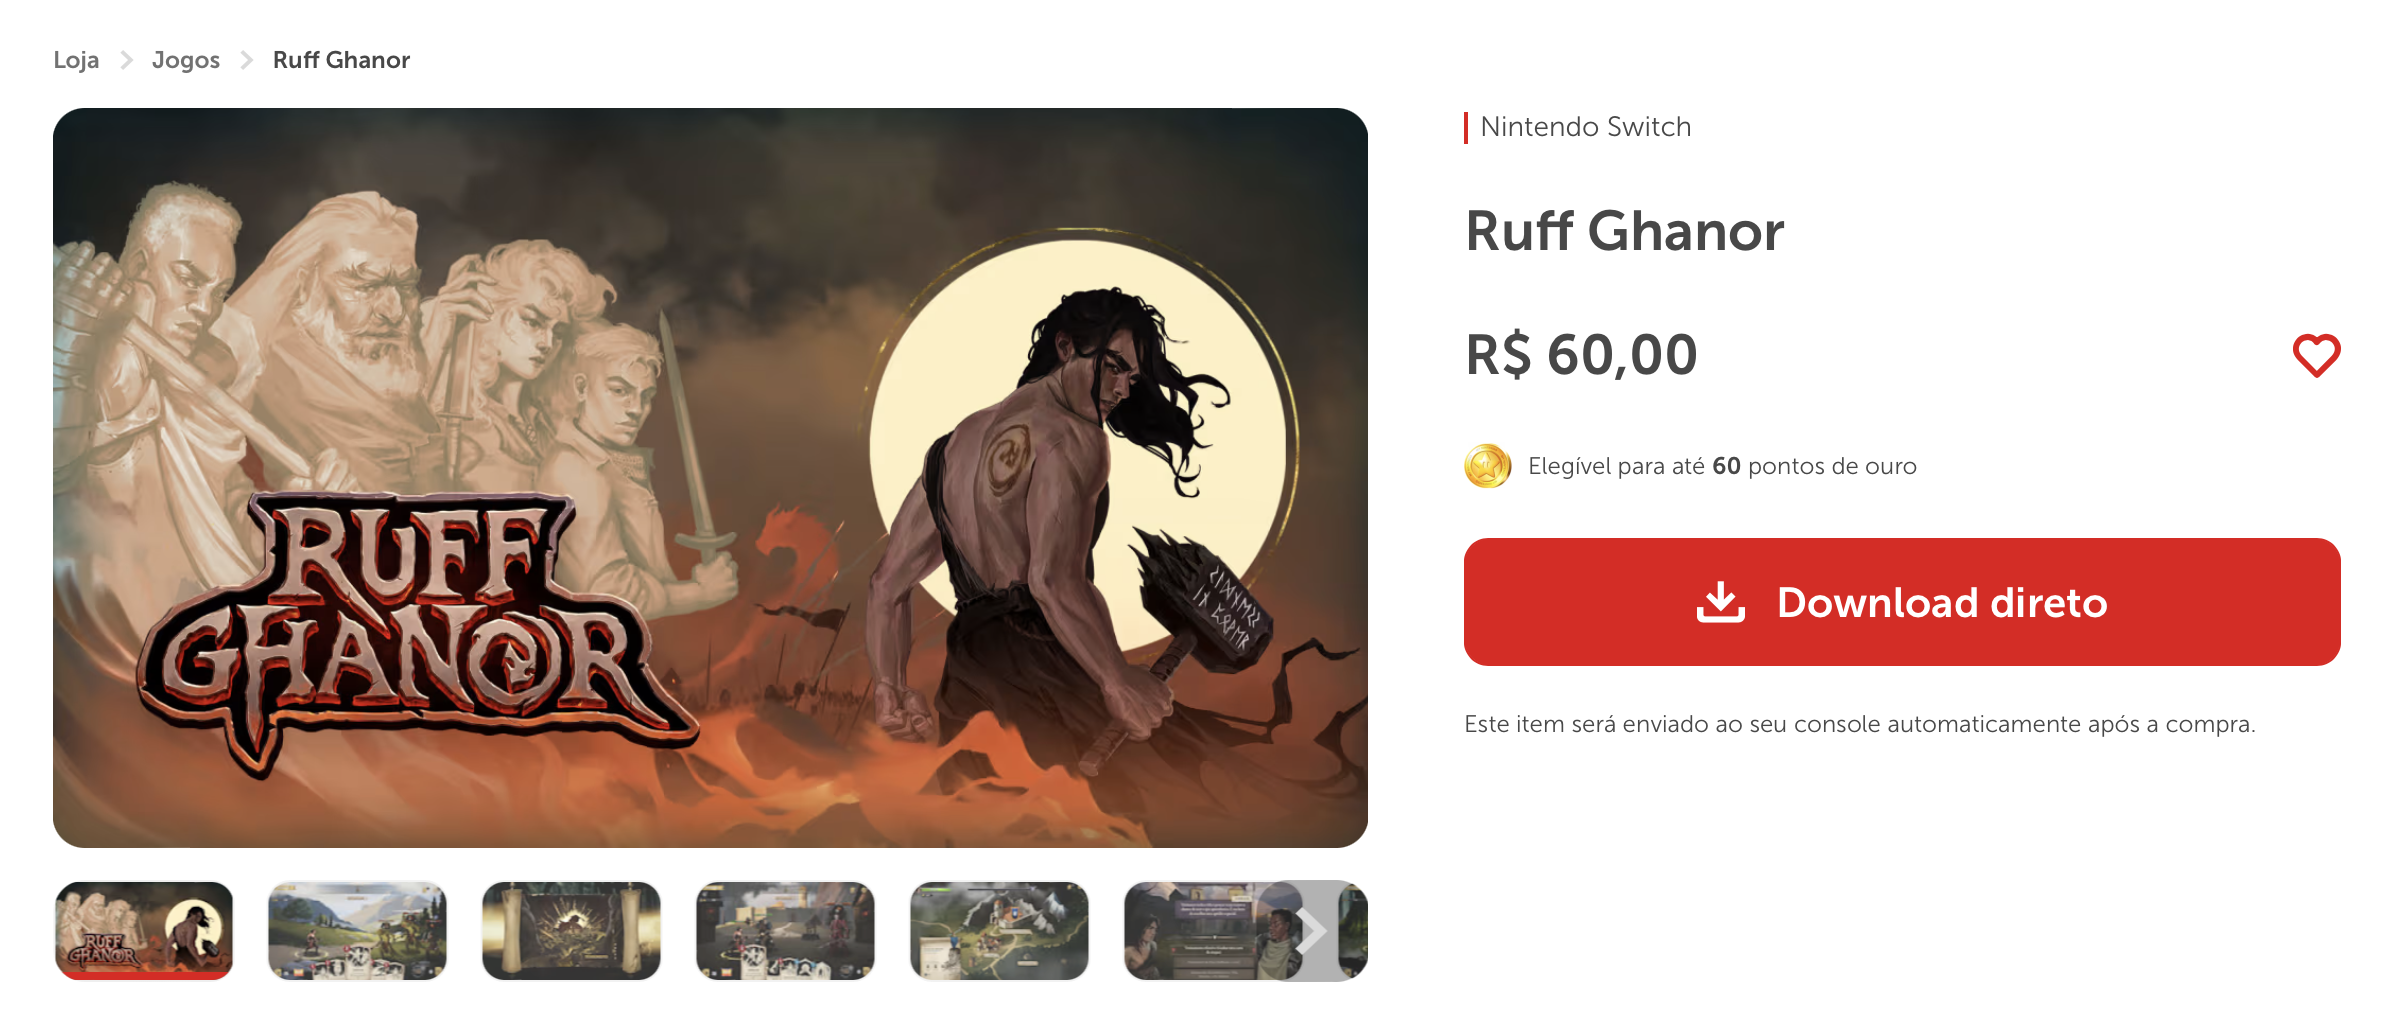 Local Brazilian currency on the game store